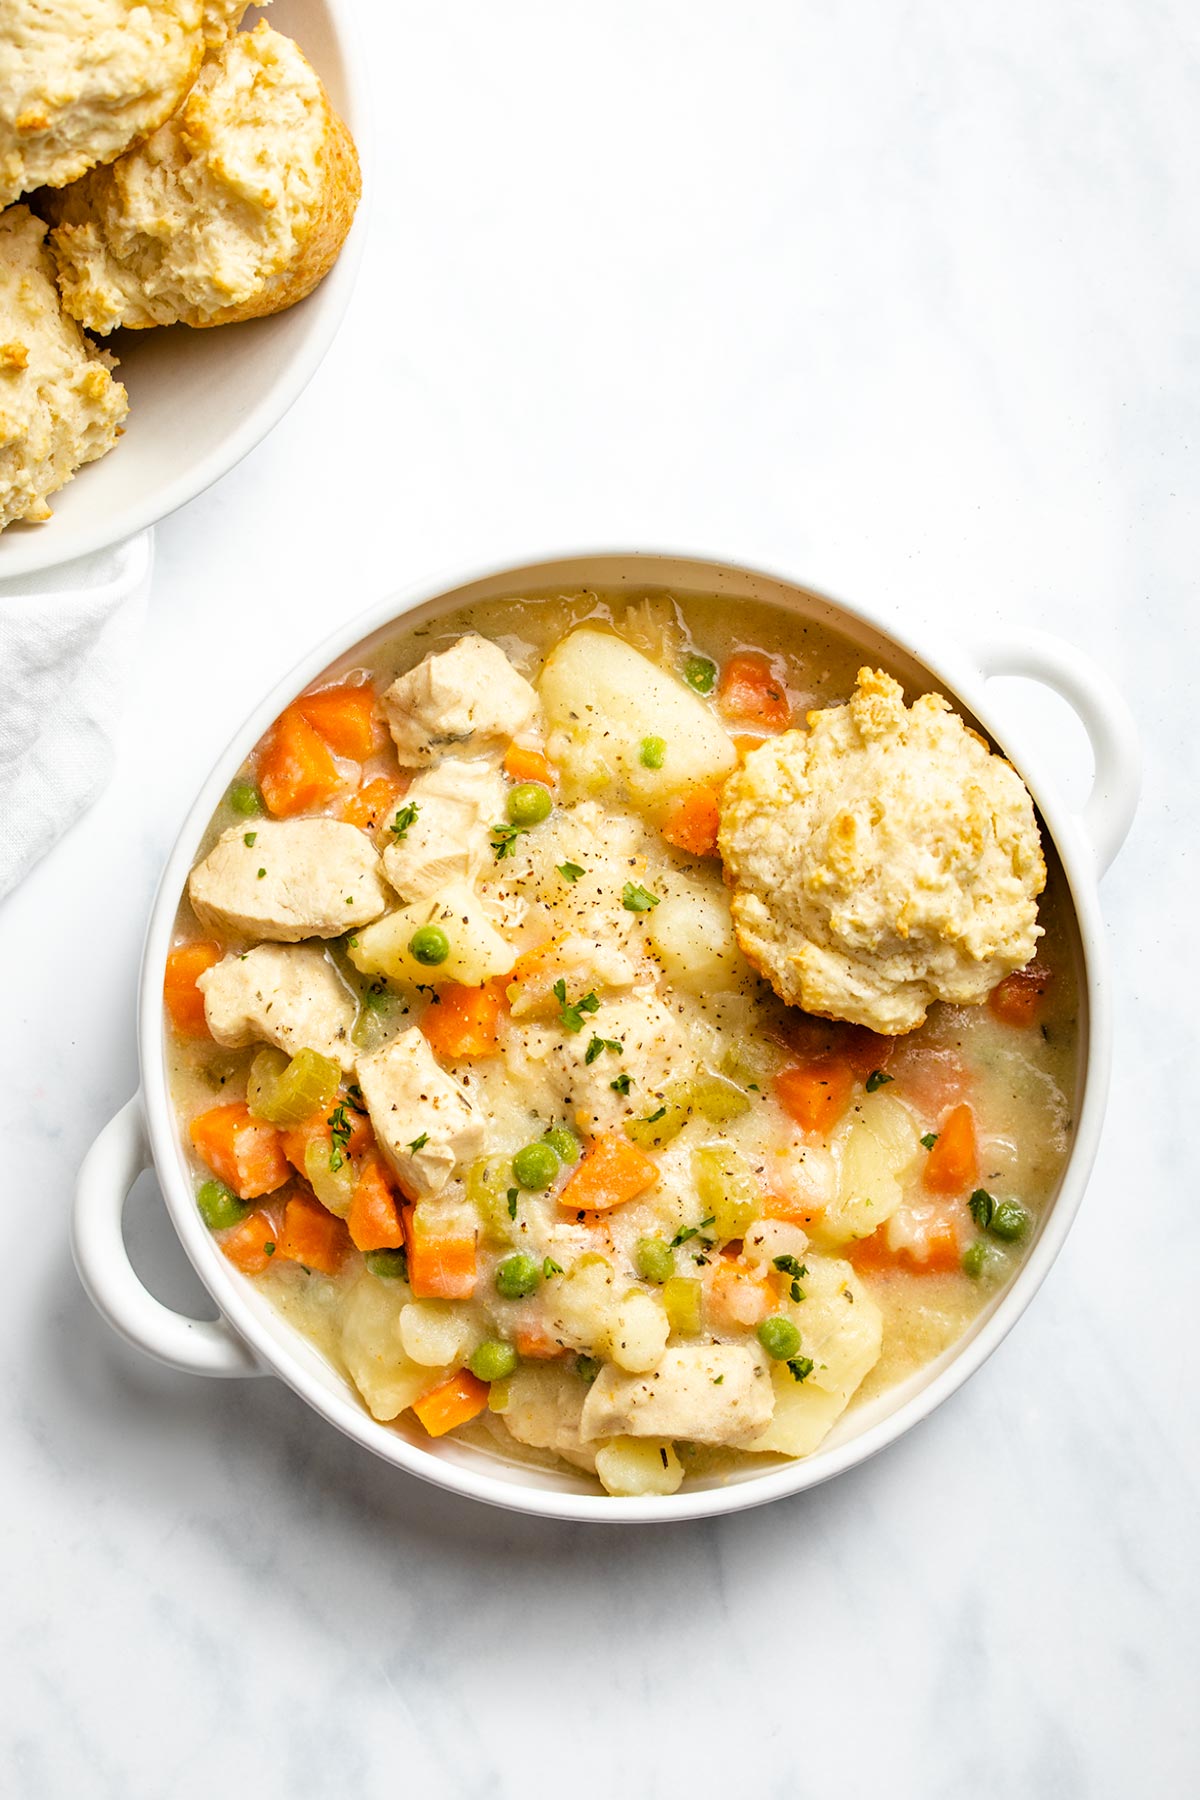 Instant Pot Chicken Pot Pie and a biscuit in a white bowl with handles viewed from overhead.